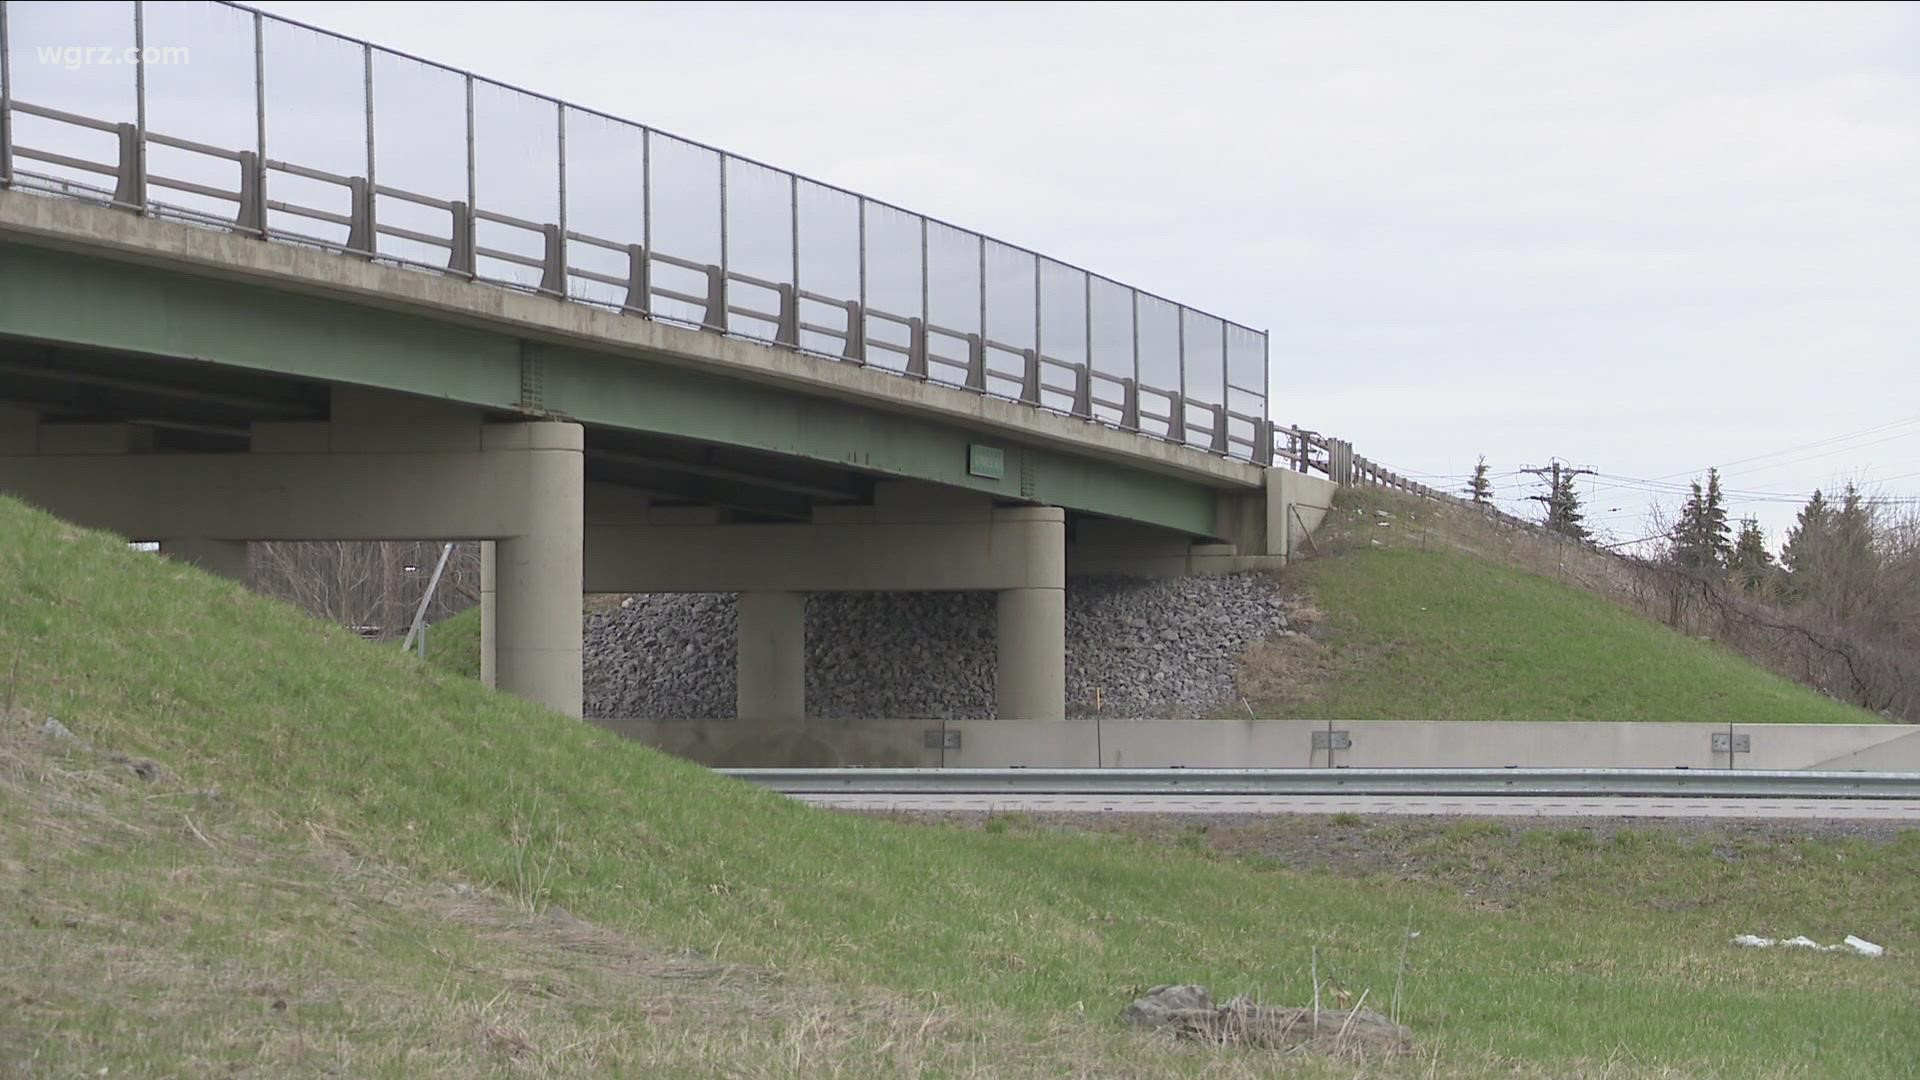 The town supervisor and other elected officials are dusting off some old plans and once again pitching the idea to get a new thruway exit for WNY.